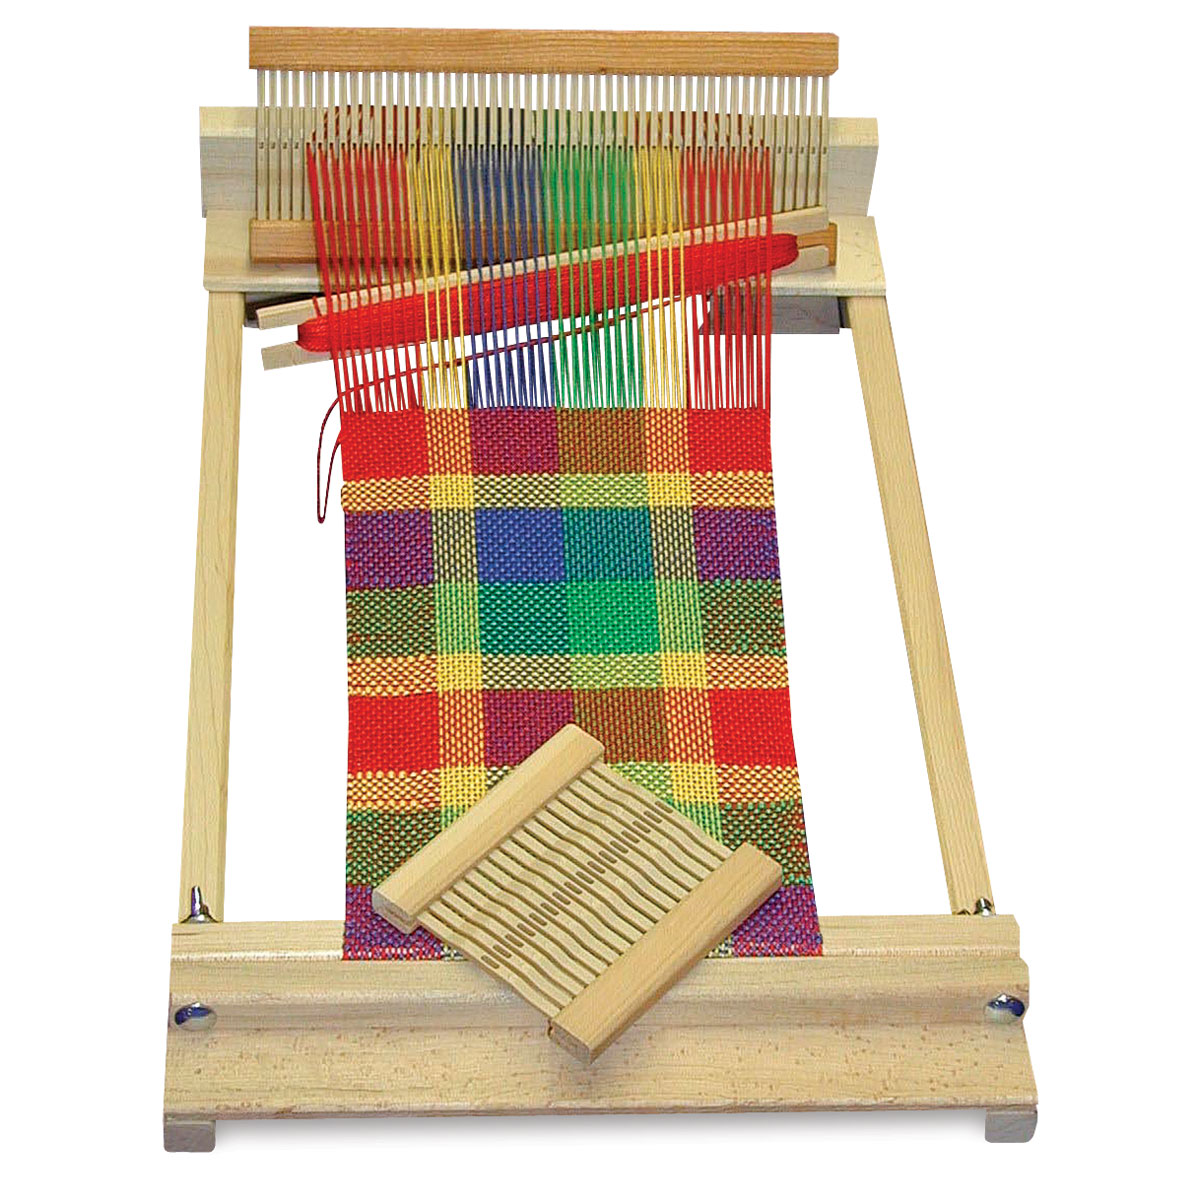 10 inch Heddle in 8 10 or 12 Dent  For 10 inc Rigid Heddle Weaving Loom